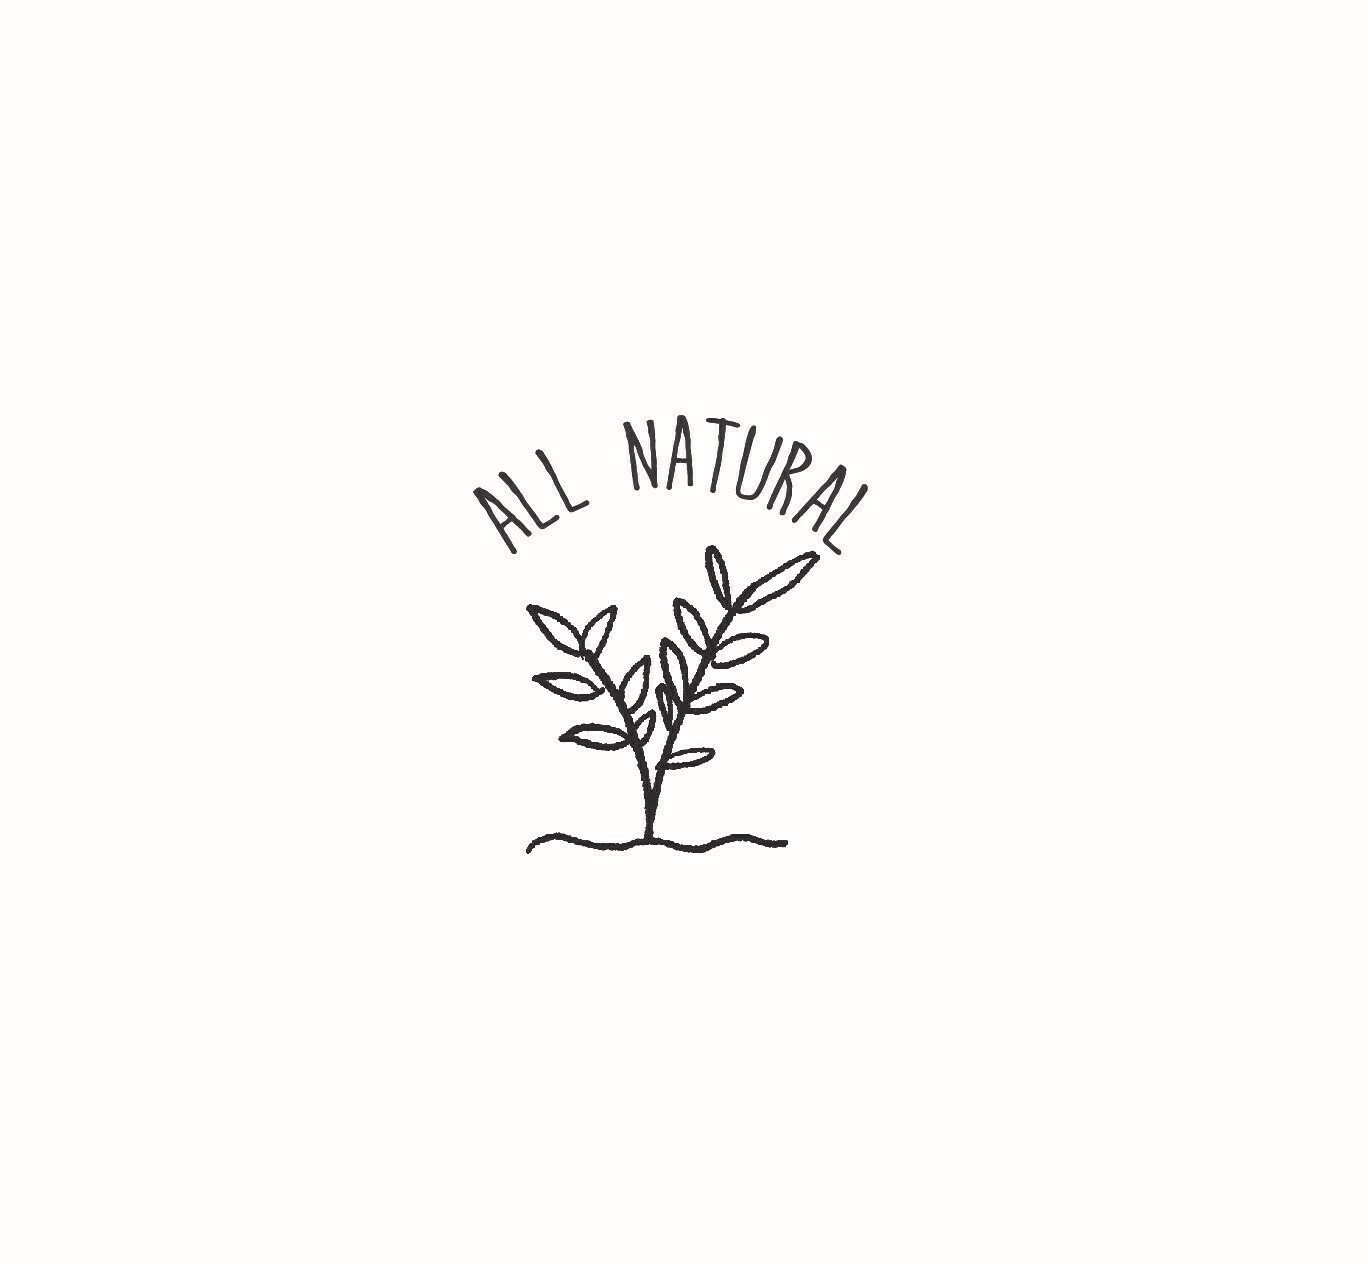 "All Natural" Rubber Stamp